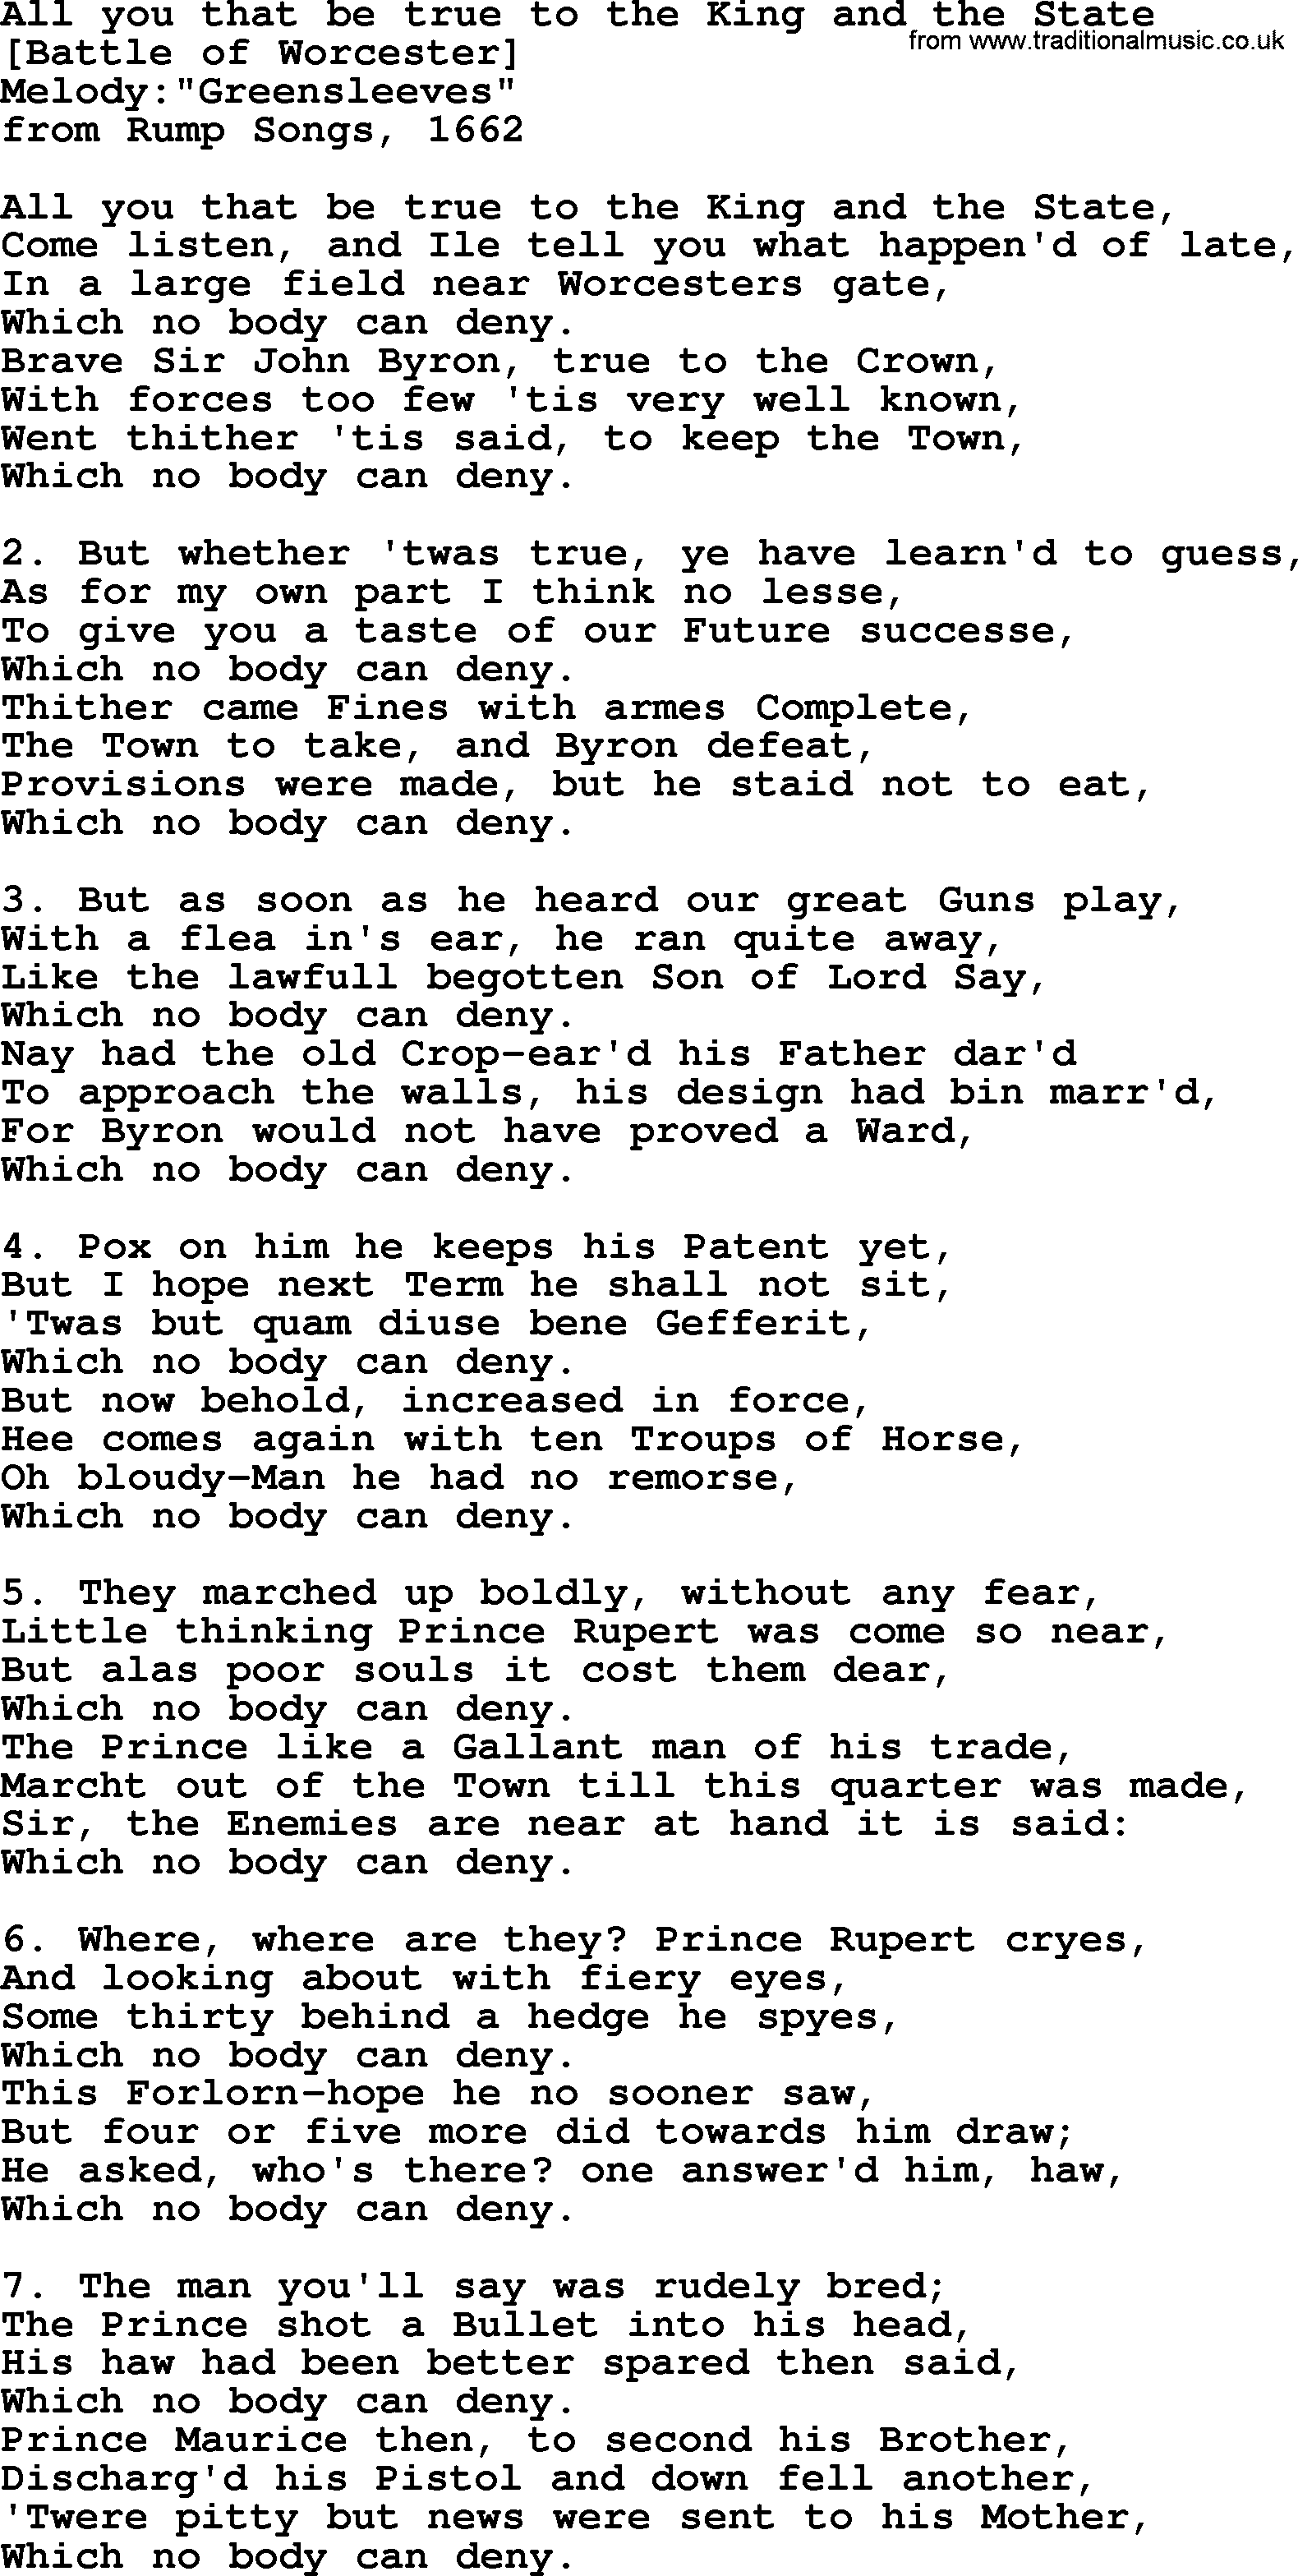 Old English Song: All You That Be True To The King And The State lyrics